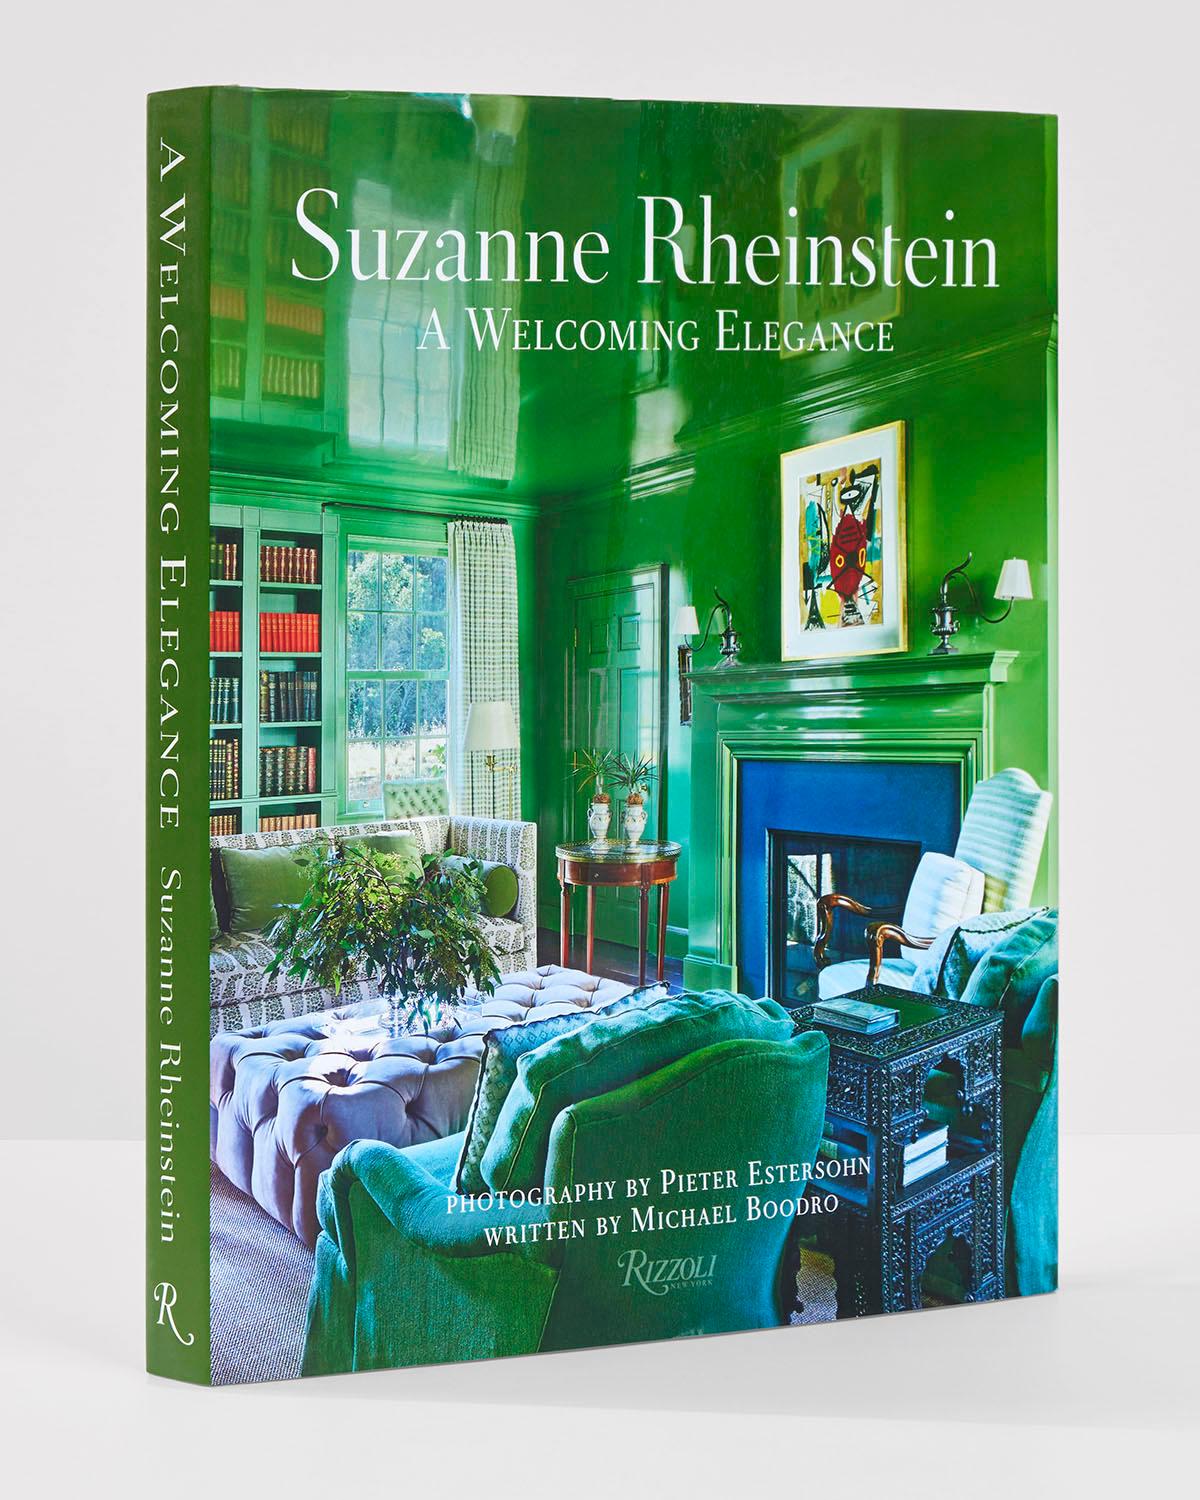 Author Suzanne Rheinstein, with Michael Boodro, Photographs by Pieter Estersohn

Over the past decade, celebrated style maker Suzanne Rheinstein has achieved an unprecedented level of refinement and clarity. Her love of objects from the past